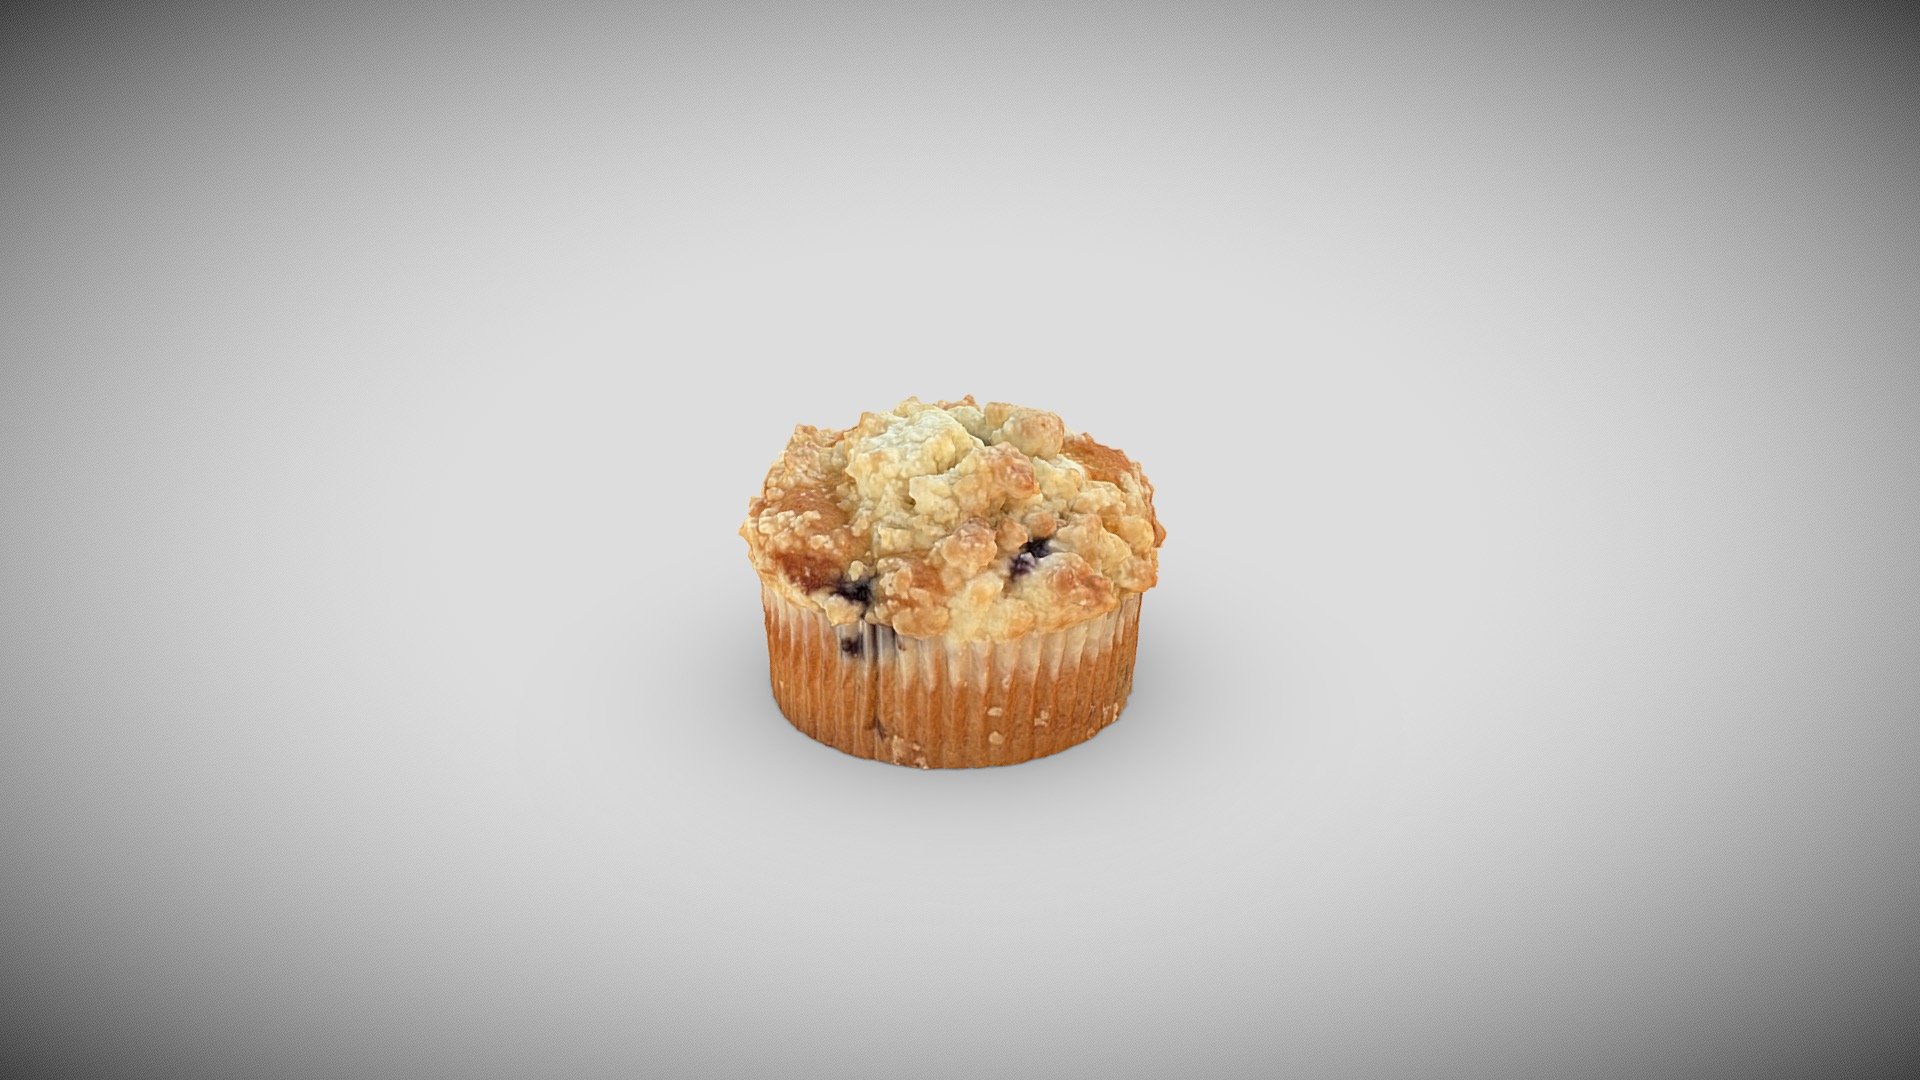 Blueberry muffin, crumble top, bakery
sweet breakfast - Blueberry Muffin - Download Free 3D model by M Parkinson (@chimaera_studio) 3d model